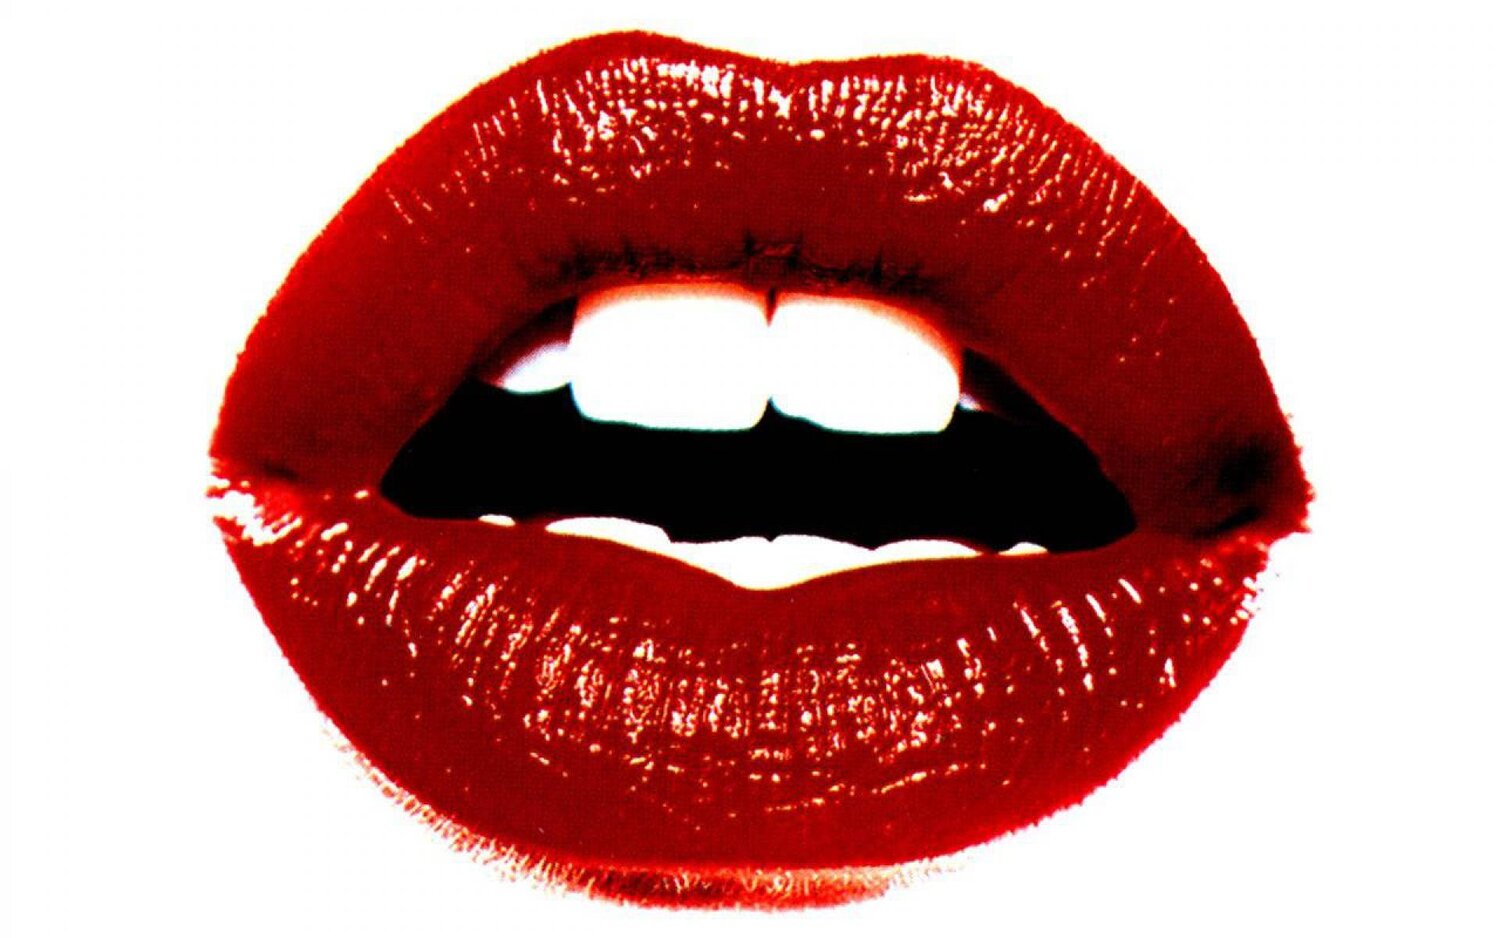 painted-female-lips-painted-with-red-lipstick.jpeg.